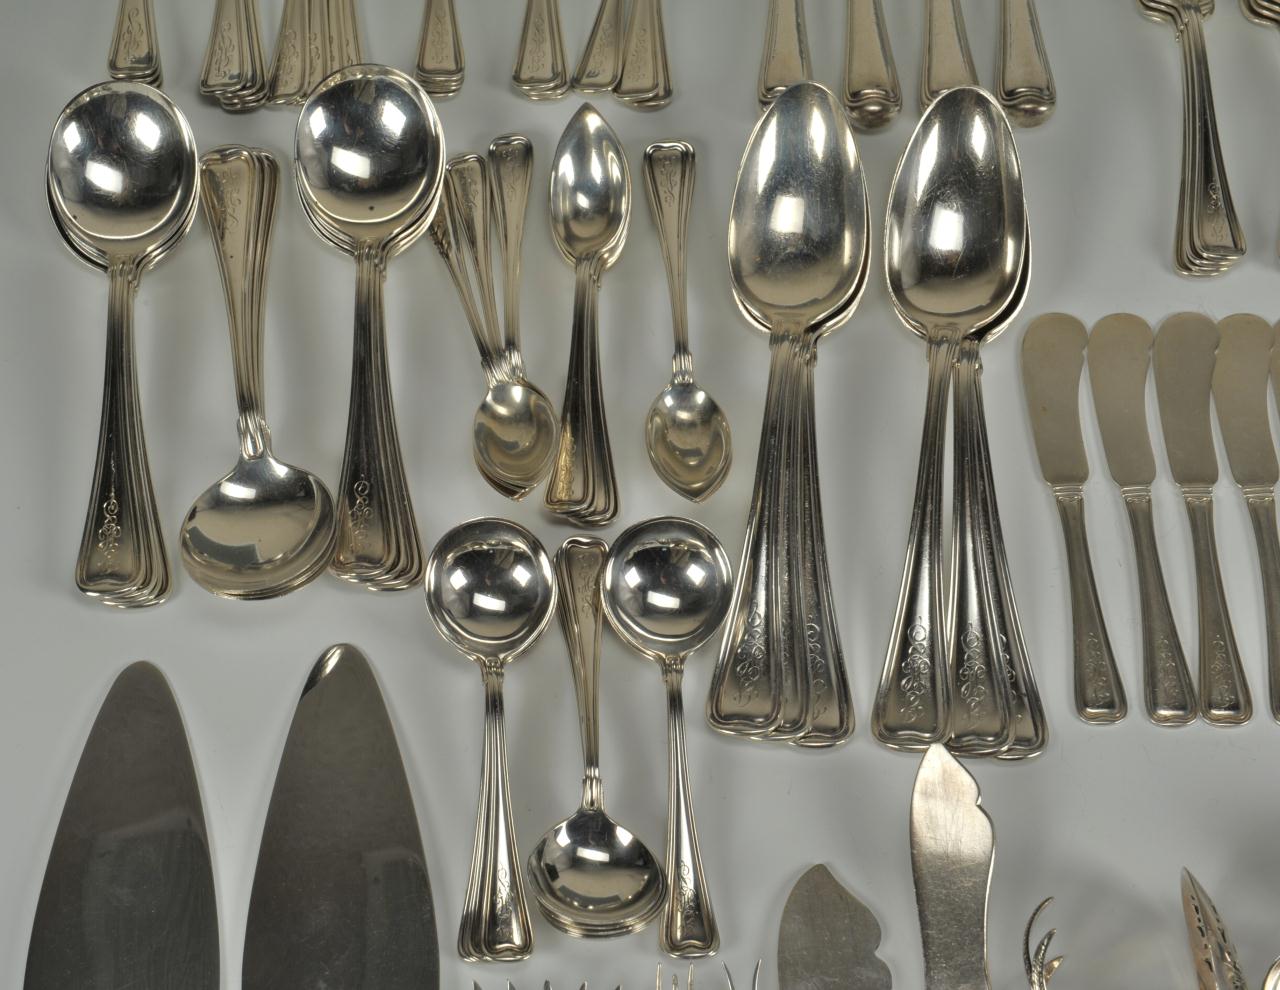 Lot 81: 183 pieces Gorham Old French Sterling Flatware